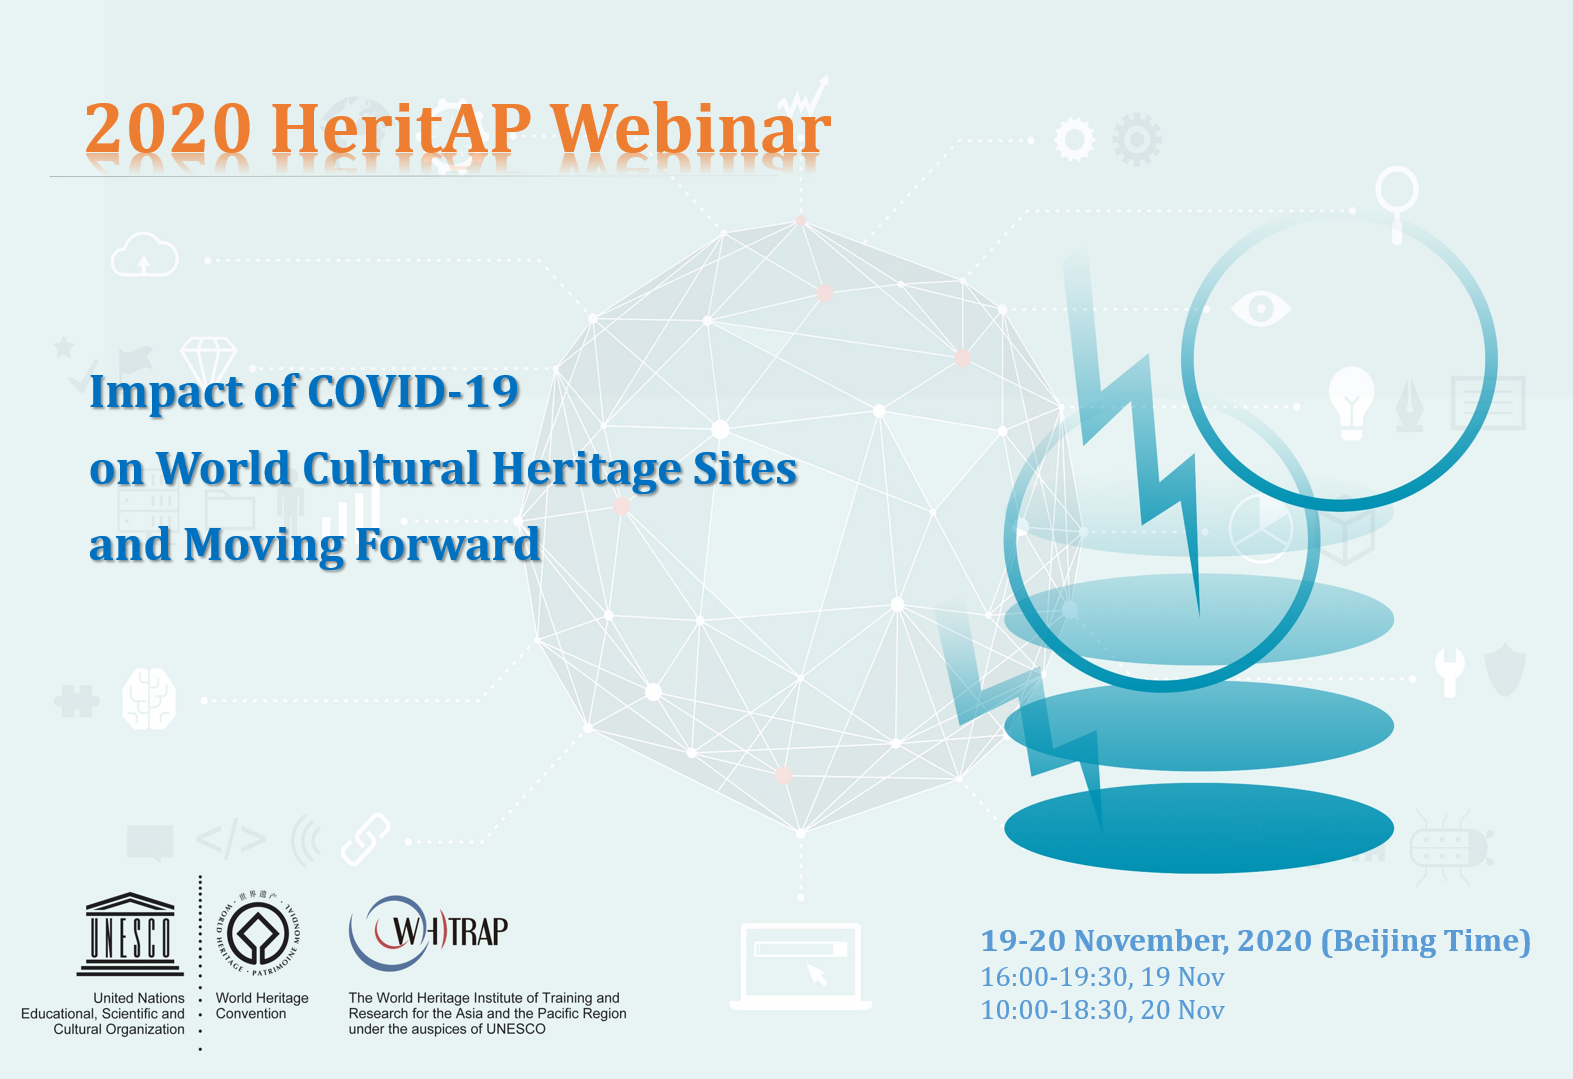 2020 HeritAP Annual Meeting on Impacts of COVID-19 on World Cultural Heritage Sites and Moving Forward